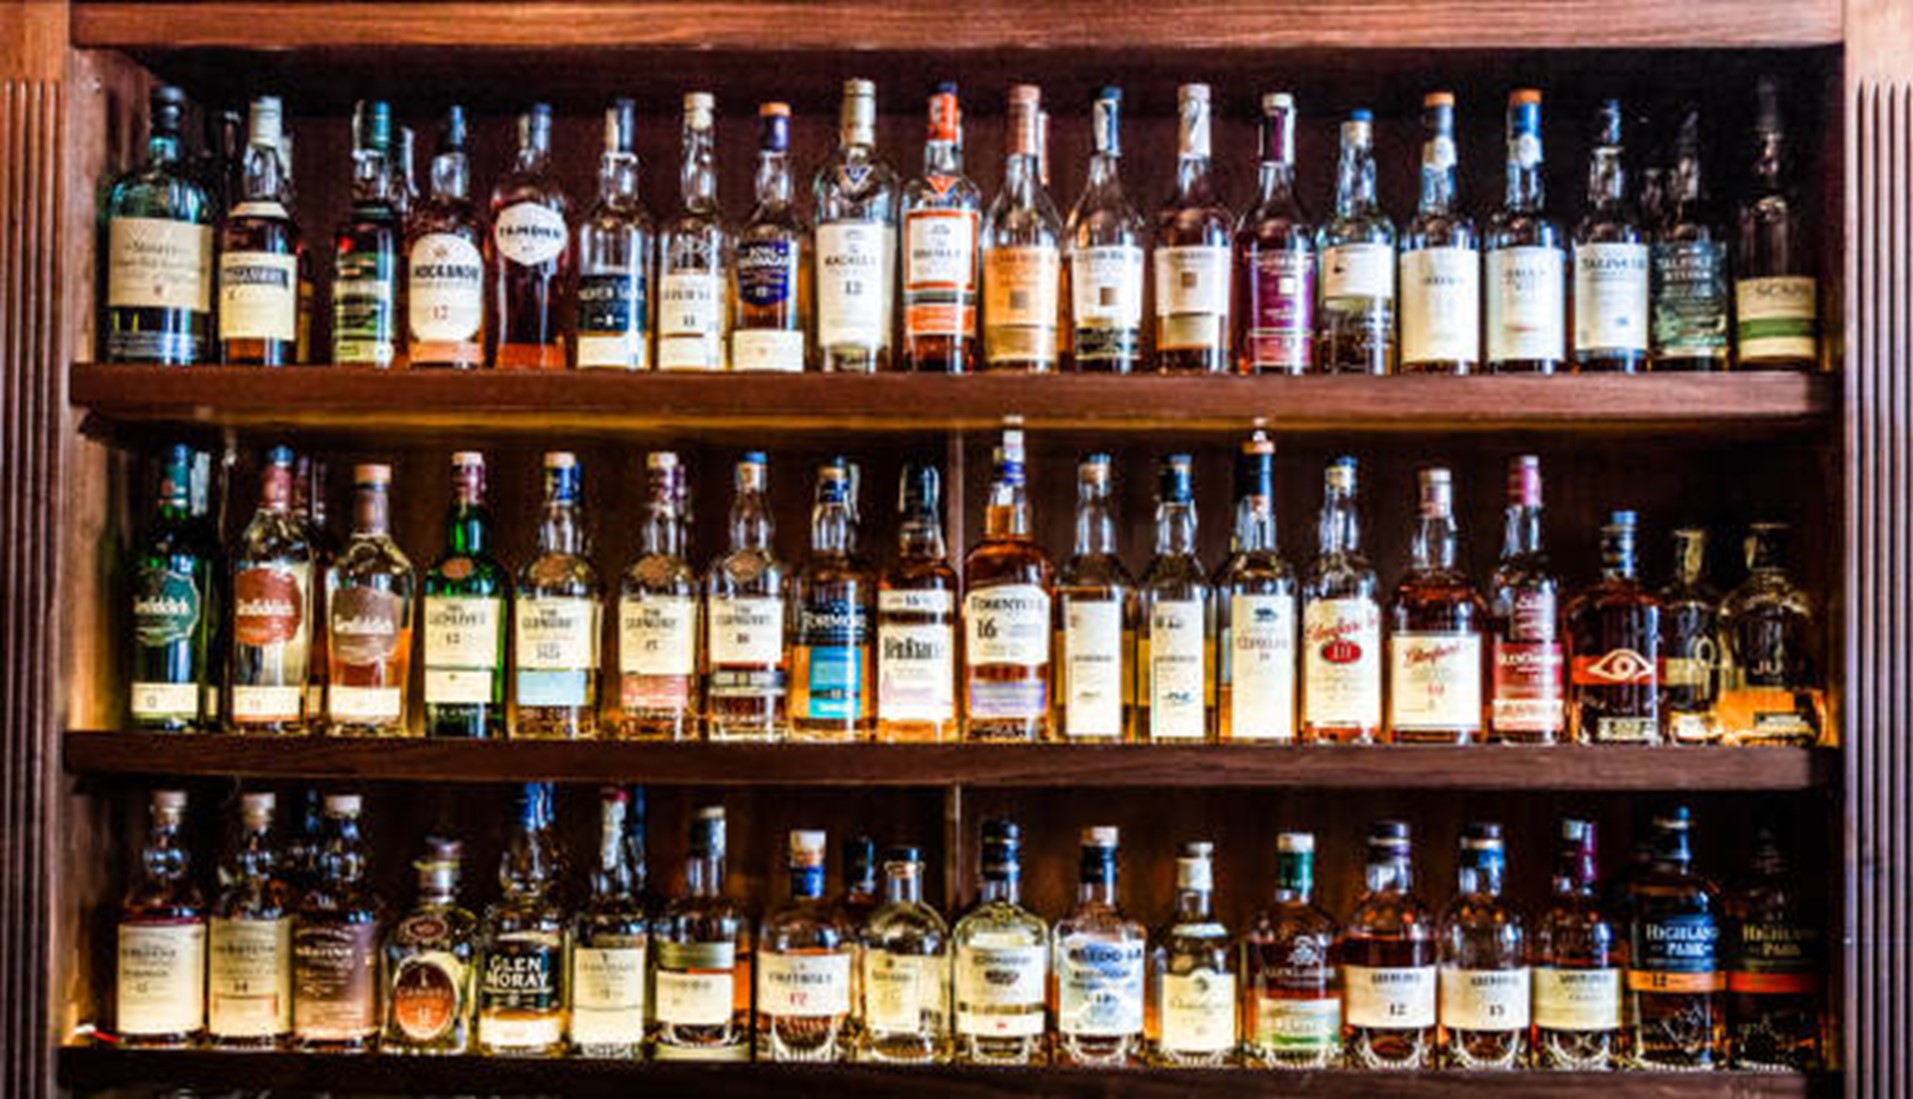 Comment conserver le rhum ? - Wines and Spirits